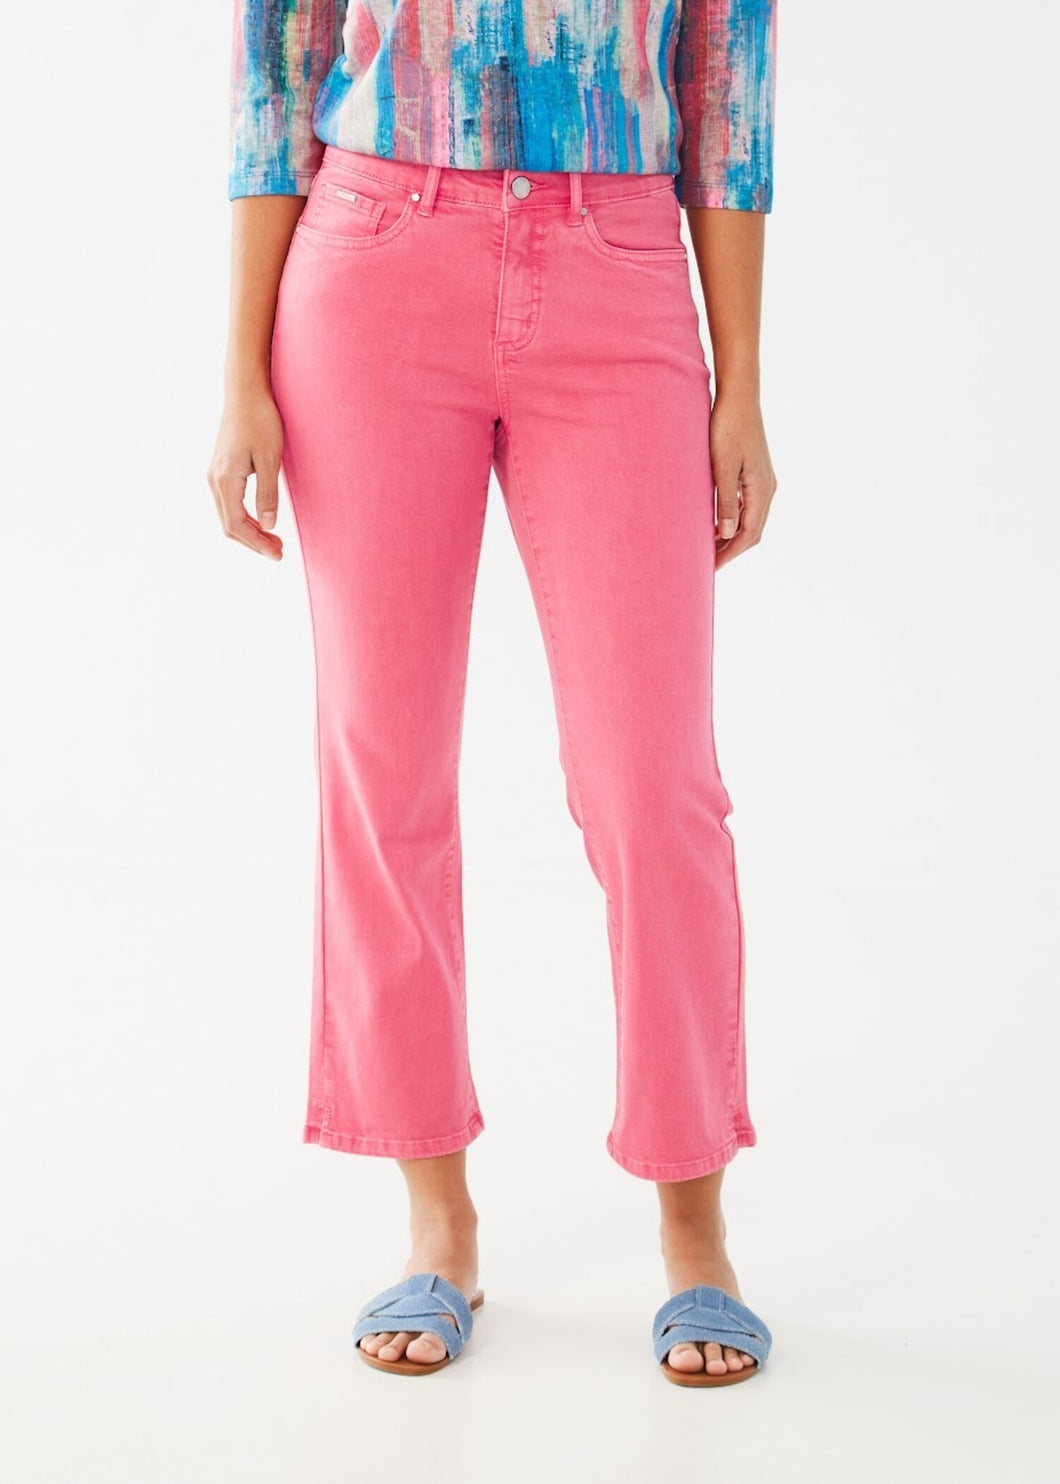 French Dressing Jeans: Olivia Boot Crop Jean in Flamingo Pink